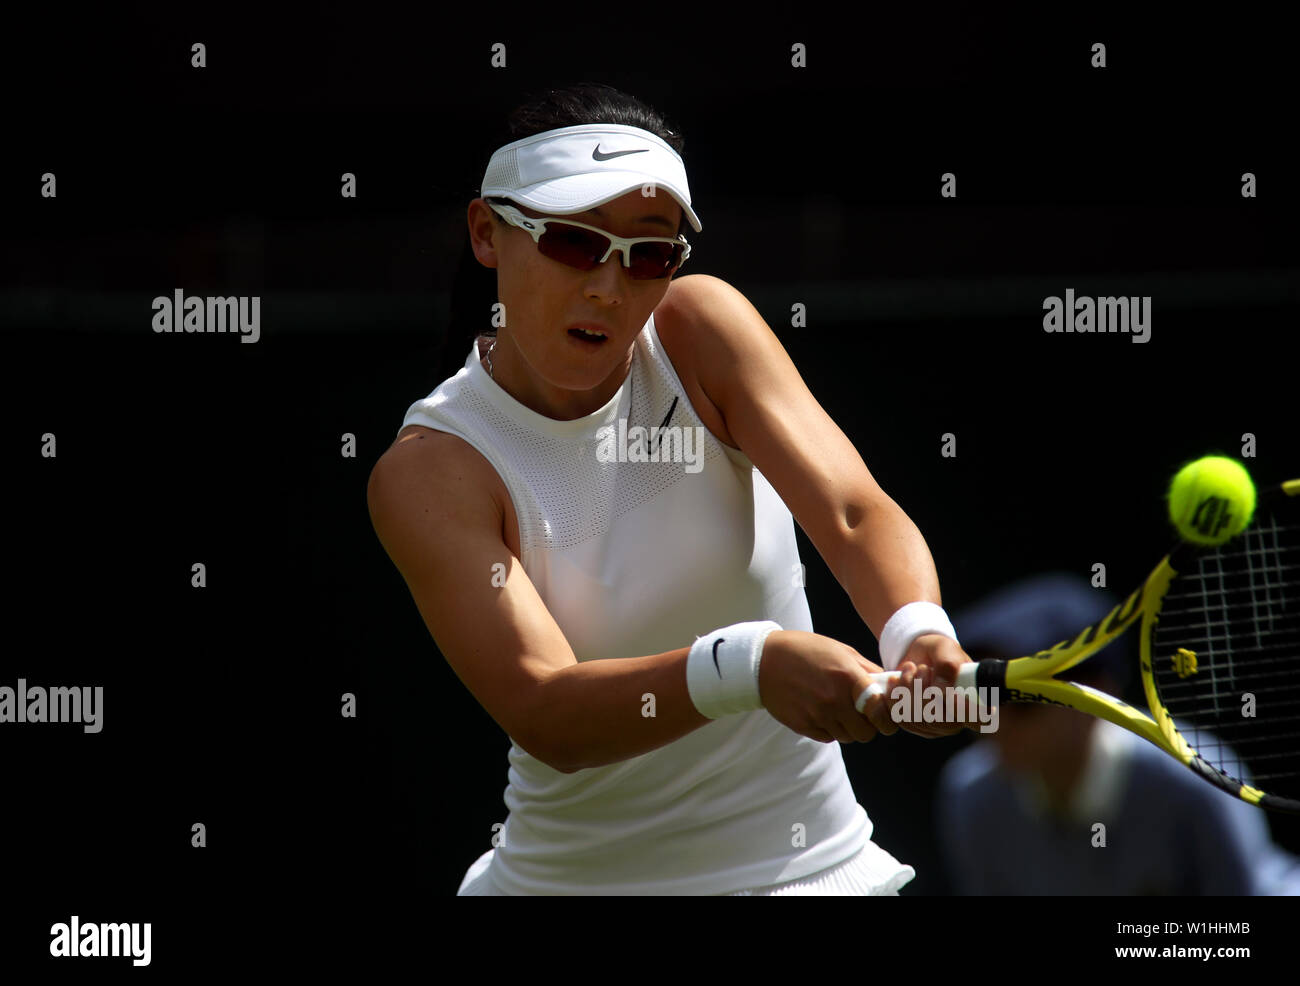 Wimbledon, London, UK. 2nd July 2019. Saisai Zheng of China hits a return to Australia's Ash Barty during their first round match at Wimbledon today.  Barty won the match in straight sets. Credit: Adam Stoltman/Alamy Live News Stock Photo